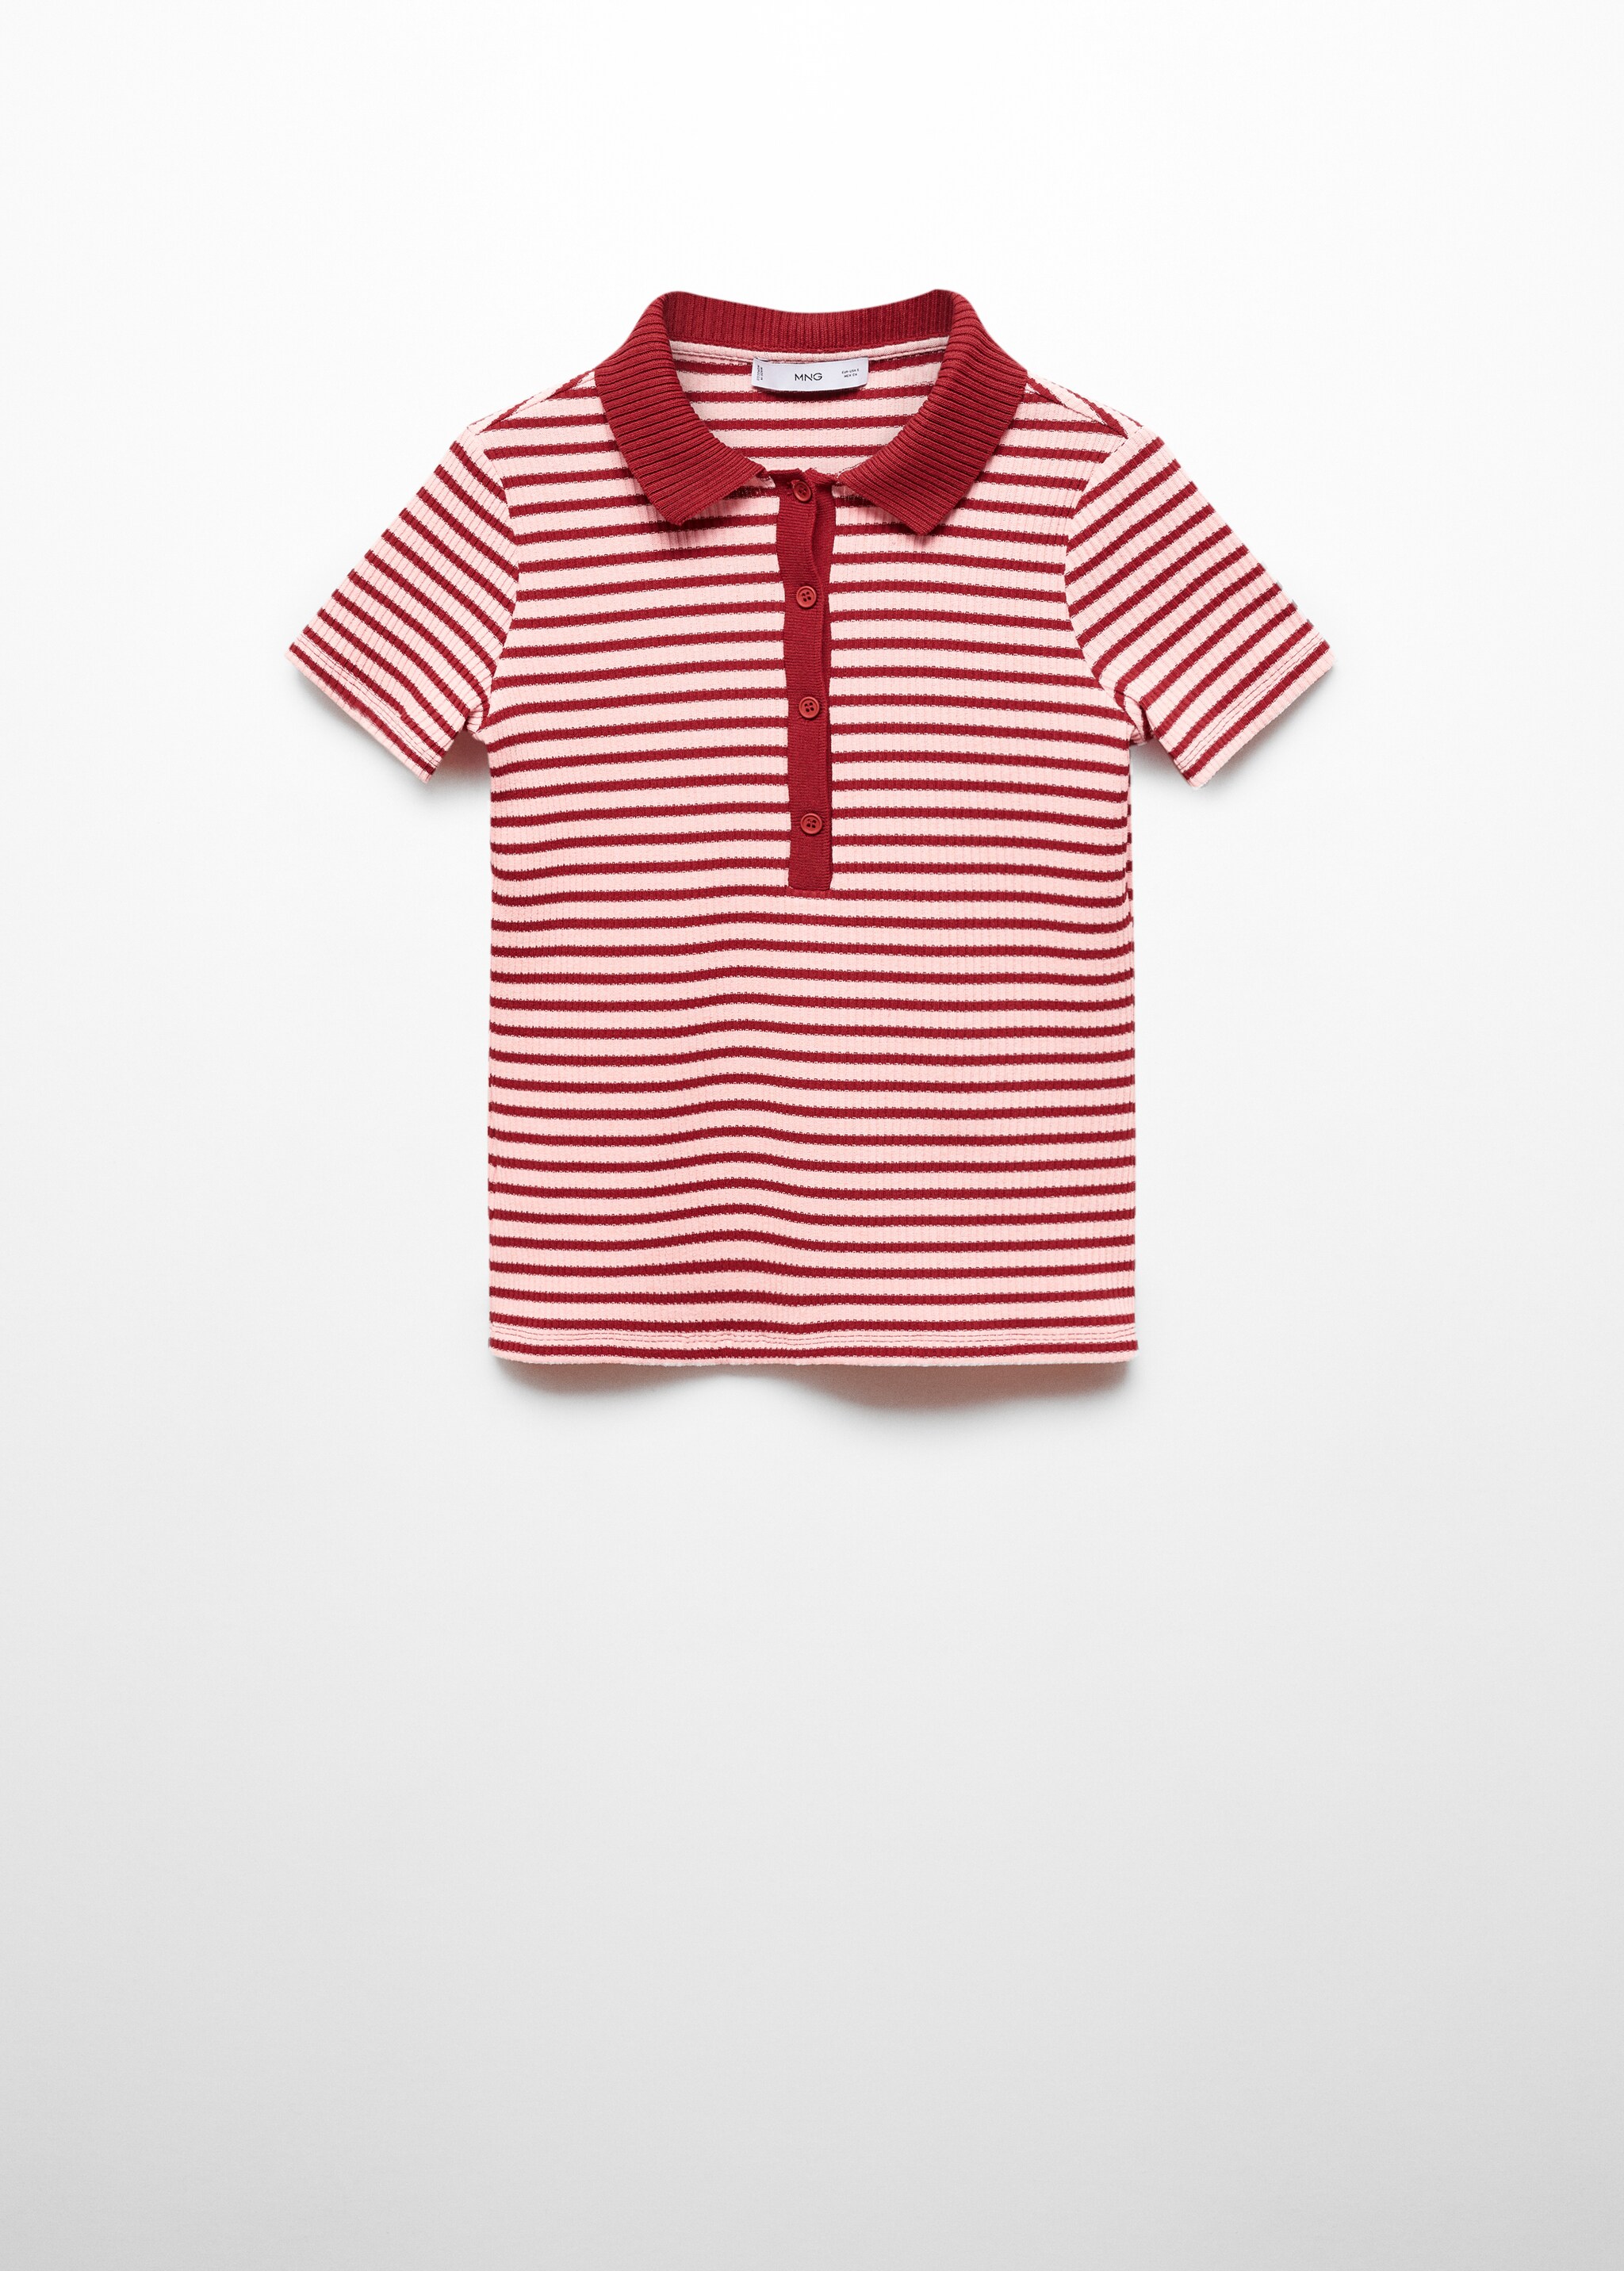  Short sleeve striped polo shirt - Article without model